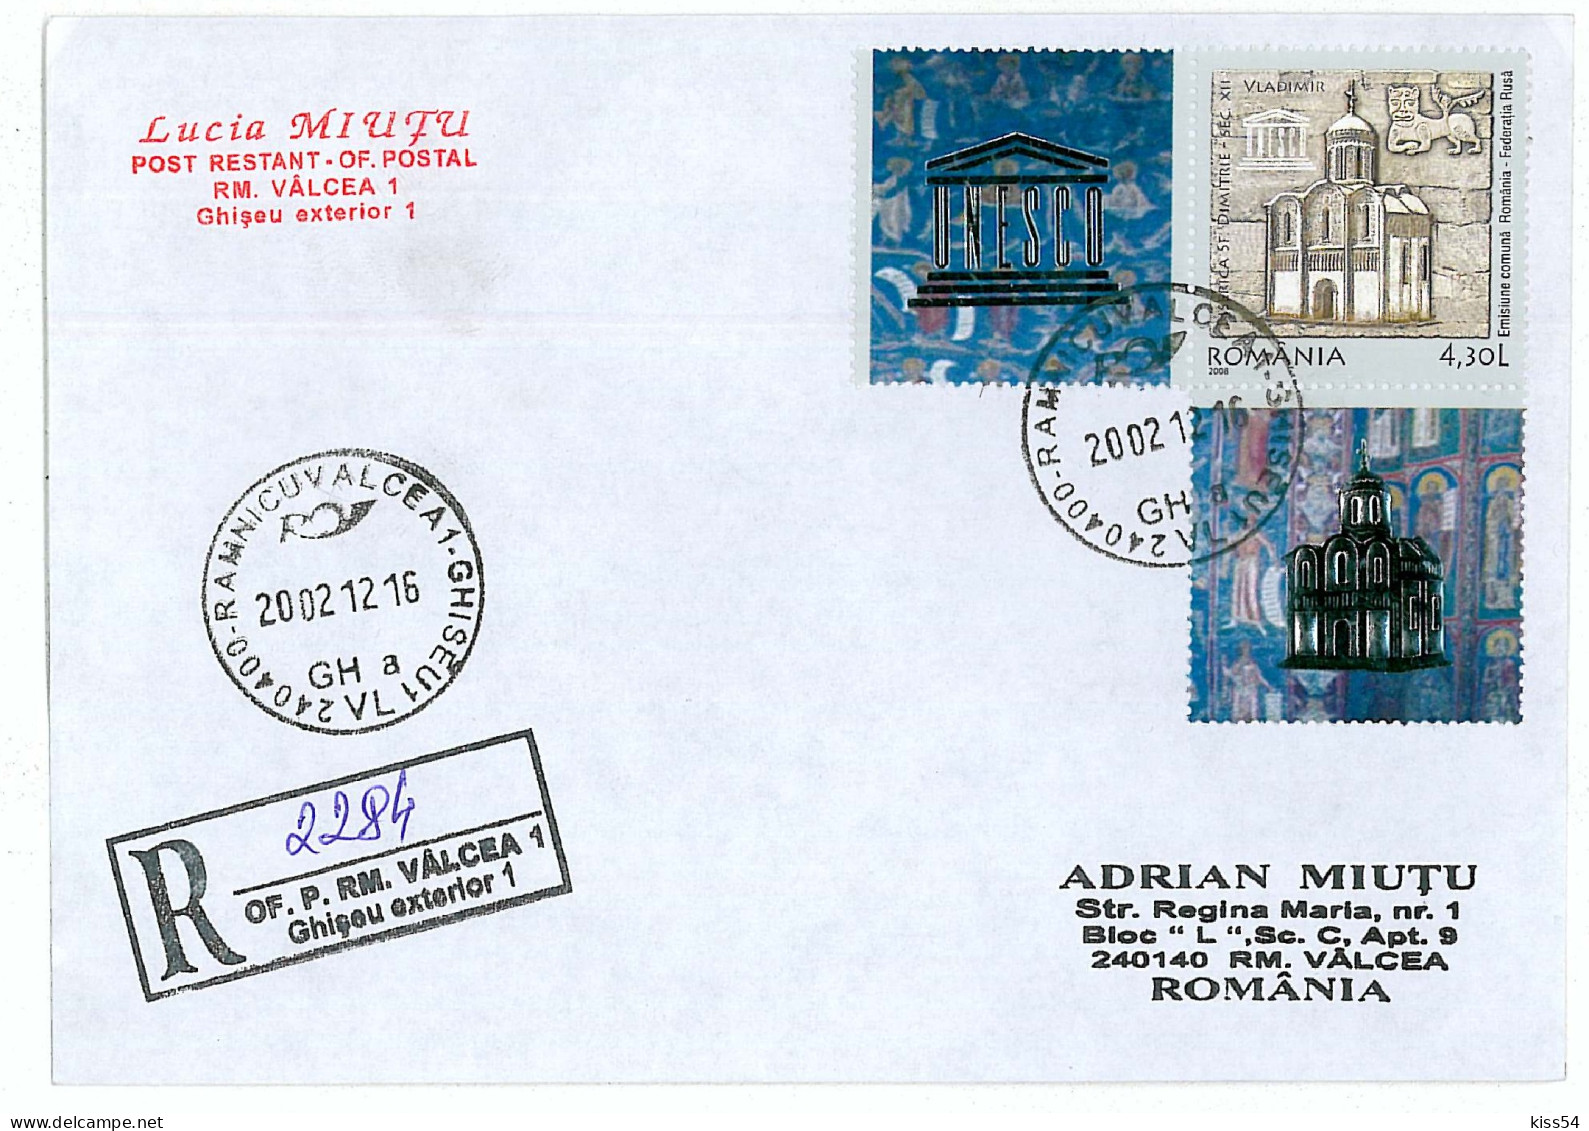 NCP 25 - 2284-a Russian CHURCH, Romania - Registered, Stamp With 2 Vignettes - 2012 - Covers & Documents